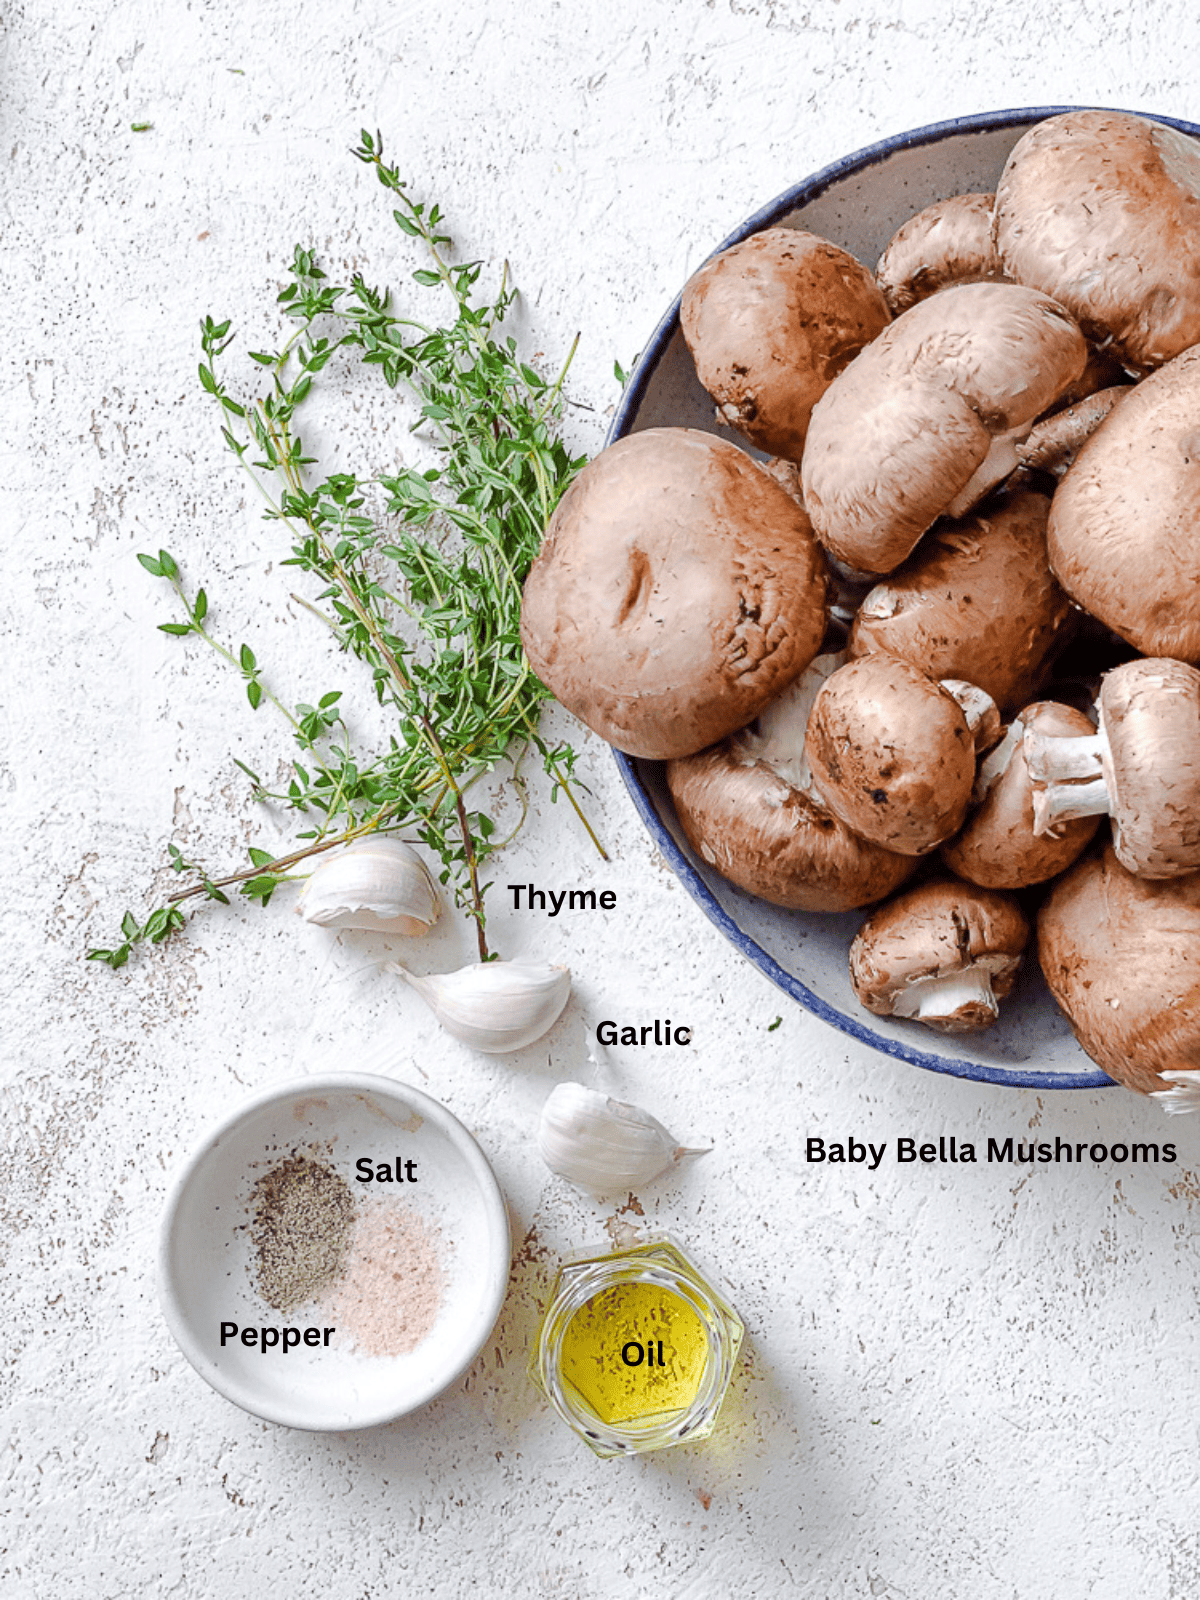 ingredients for Sauteed Mushrooms with Garlic and Thyme on a white surface